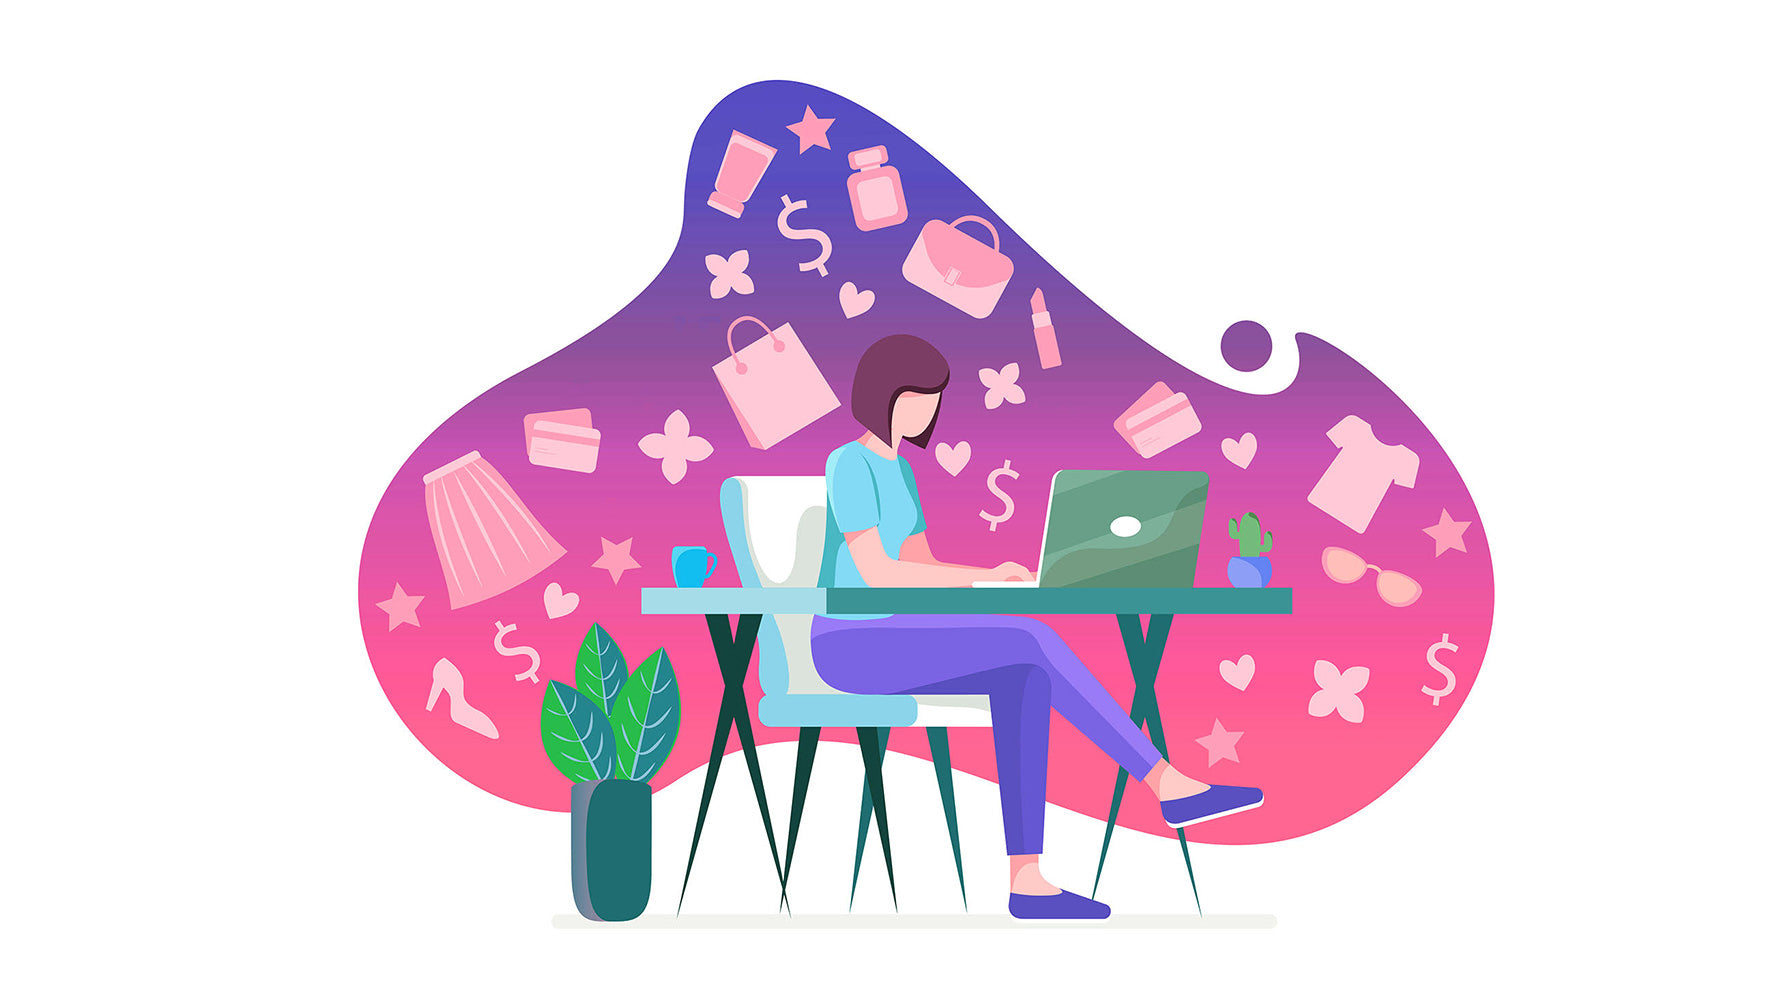 Illustration. Woman sitting in a white chair, with her laptop at a modern desk. The background is a large, organic, abstract shape filled with simple images of clothing, accessories, credit cards, dollar signs, make-up, laurel flowers and stars.